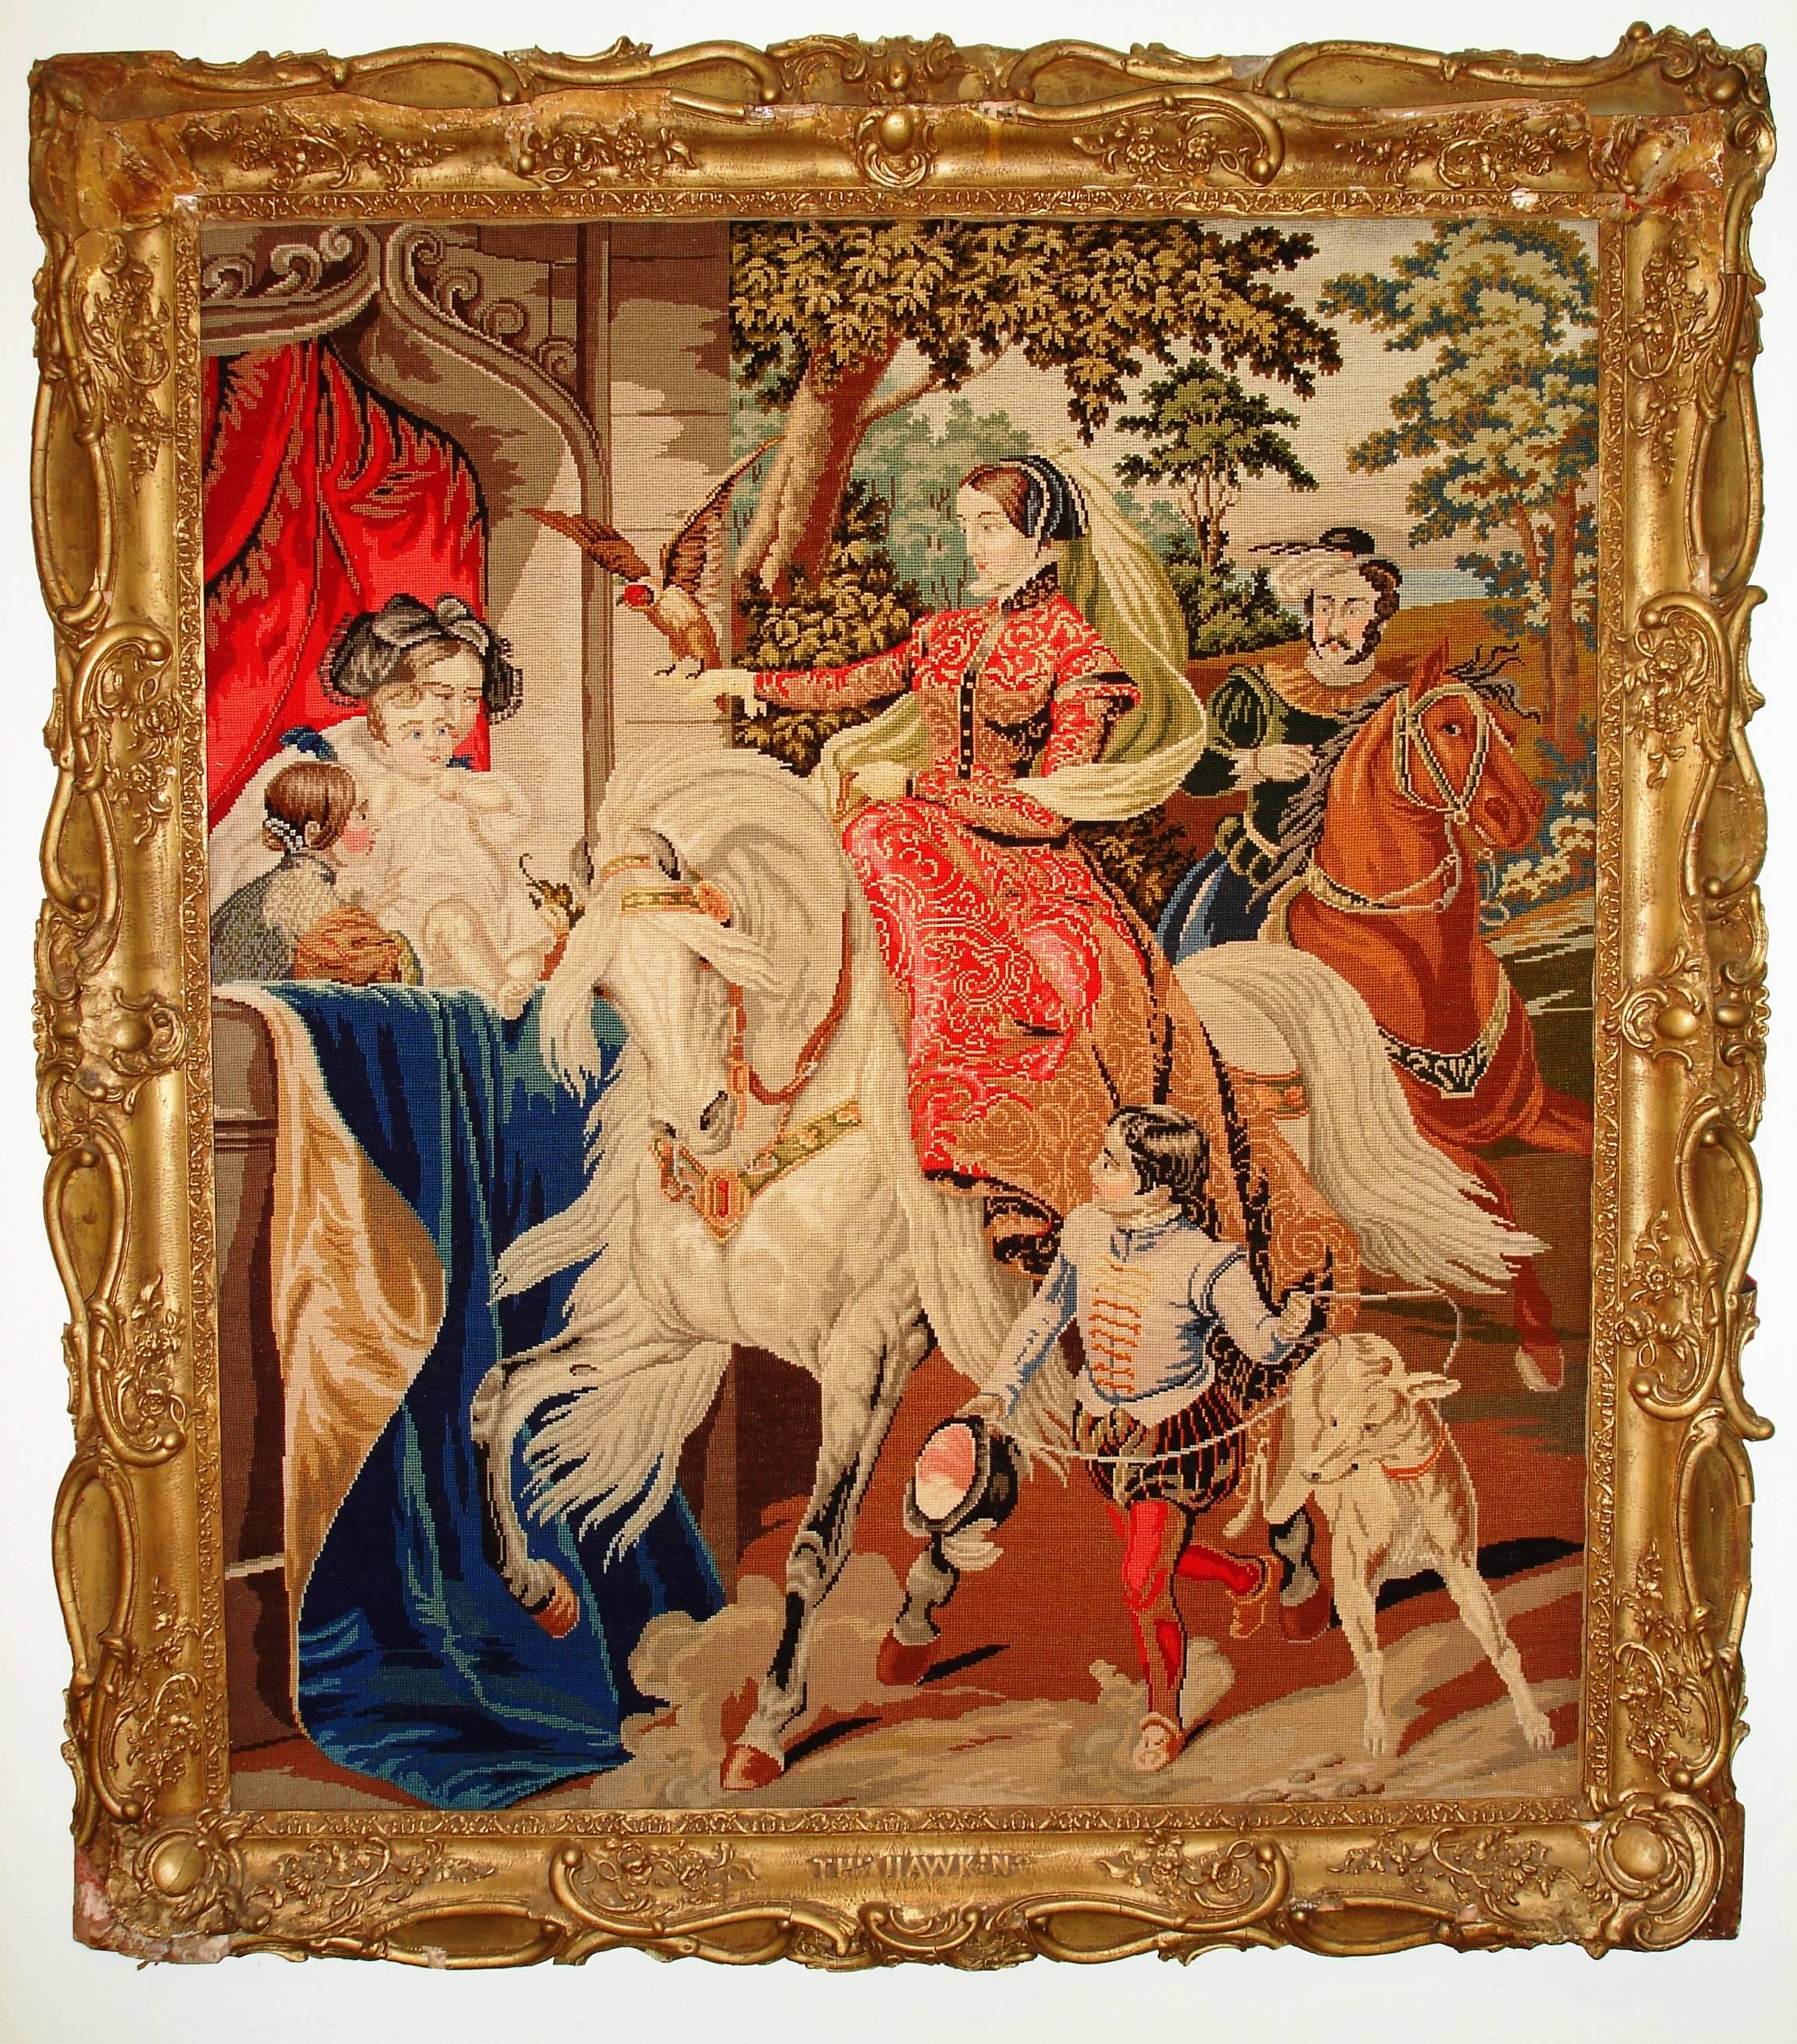 A Royal Regalia--A late 19th century magnificent truly one of a kind rare needlepoint tapestry depicting. A Renaissance style 16th century scene. Very fine beautiful needlepoint in Renaissance style with the most vivid colors. English needlework in